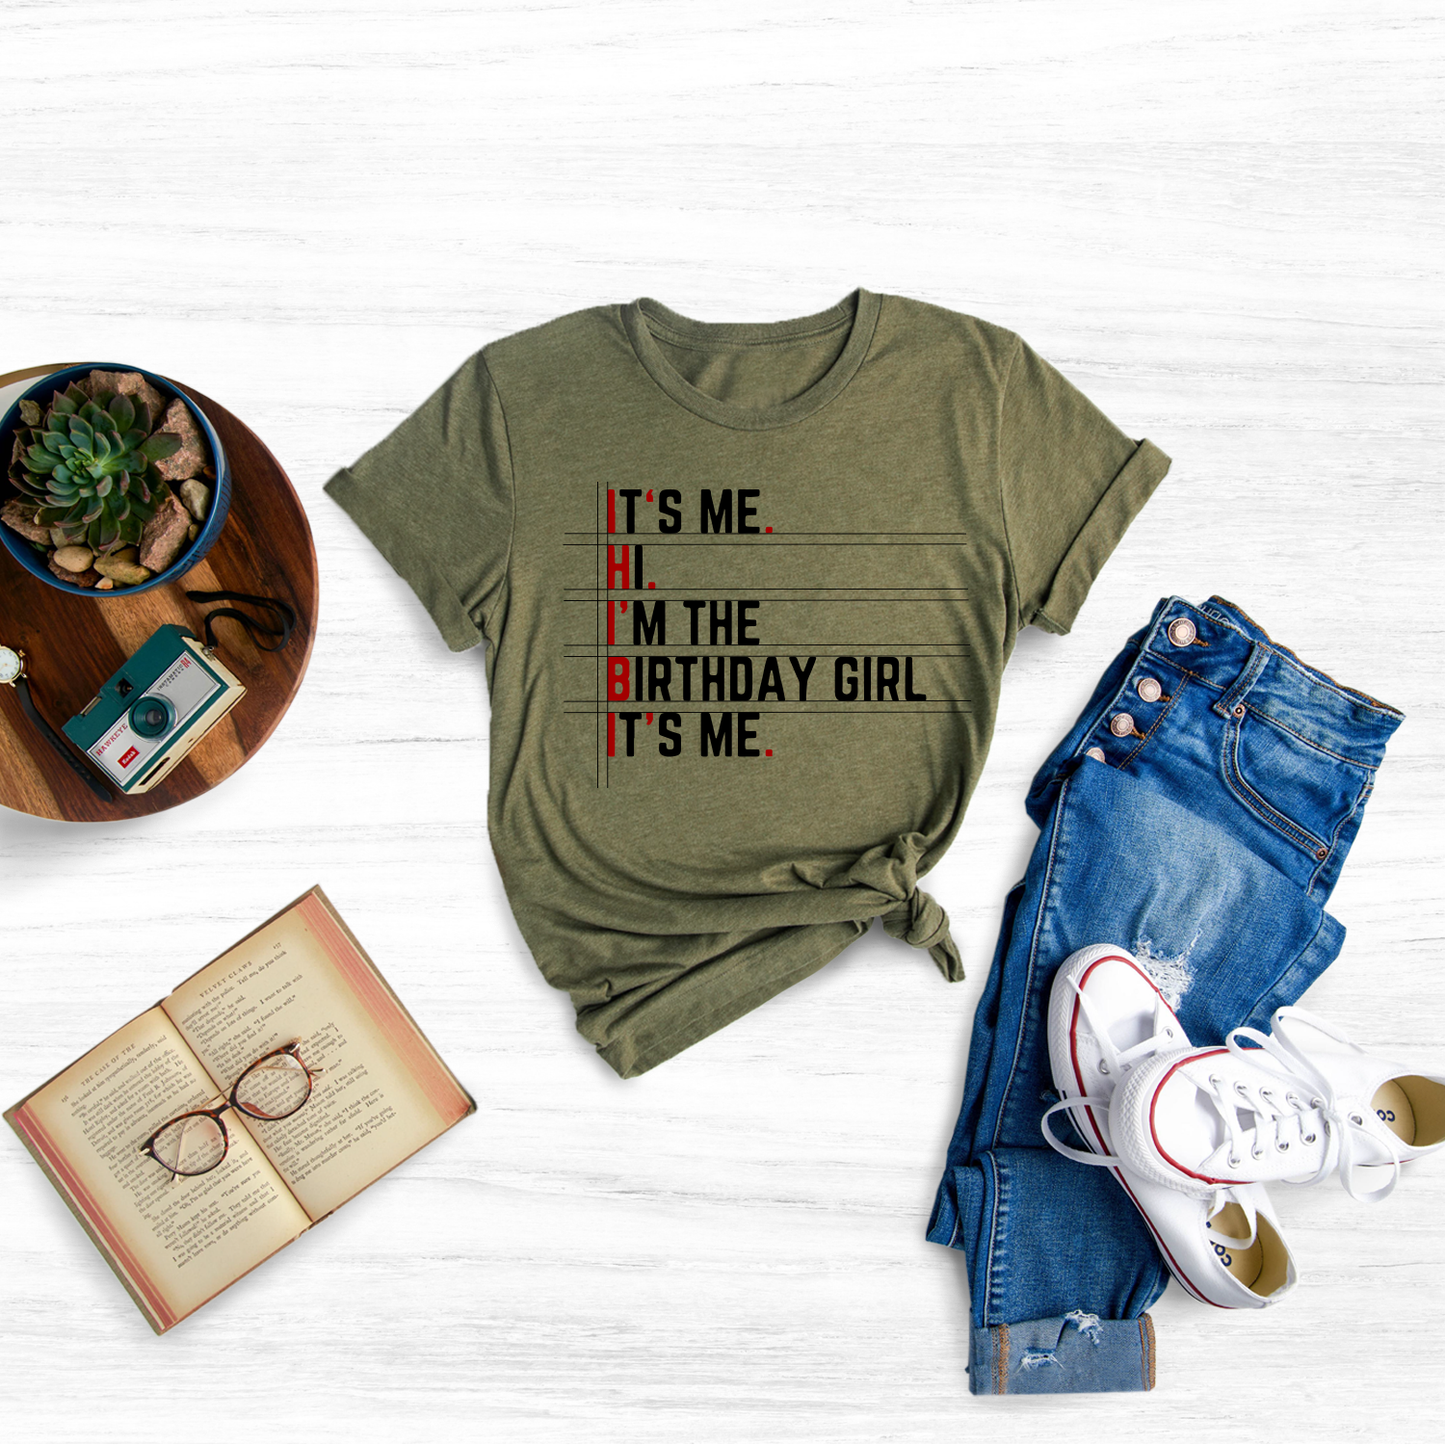 Mark your milestone with this unique and eye-catching glitter "Birthday Girl" shirt. 